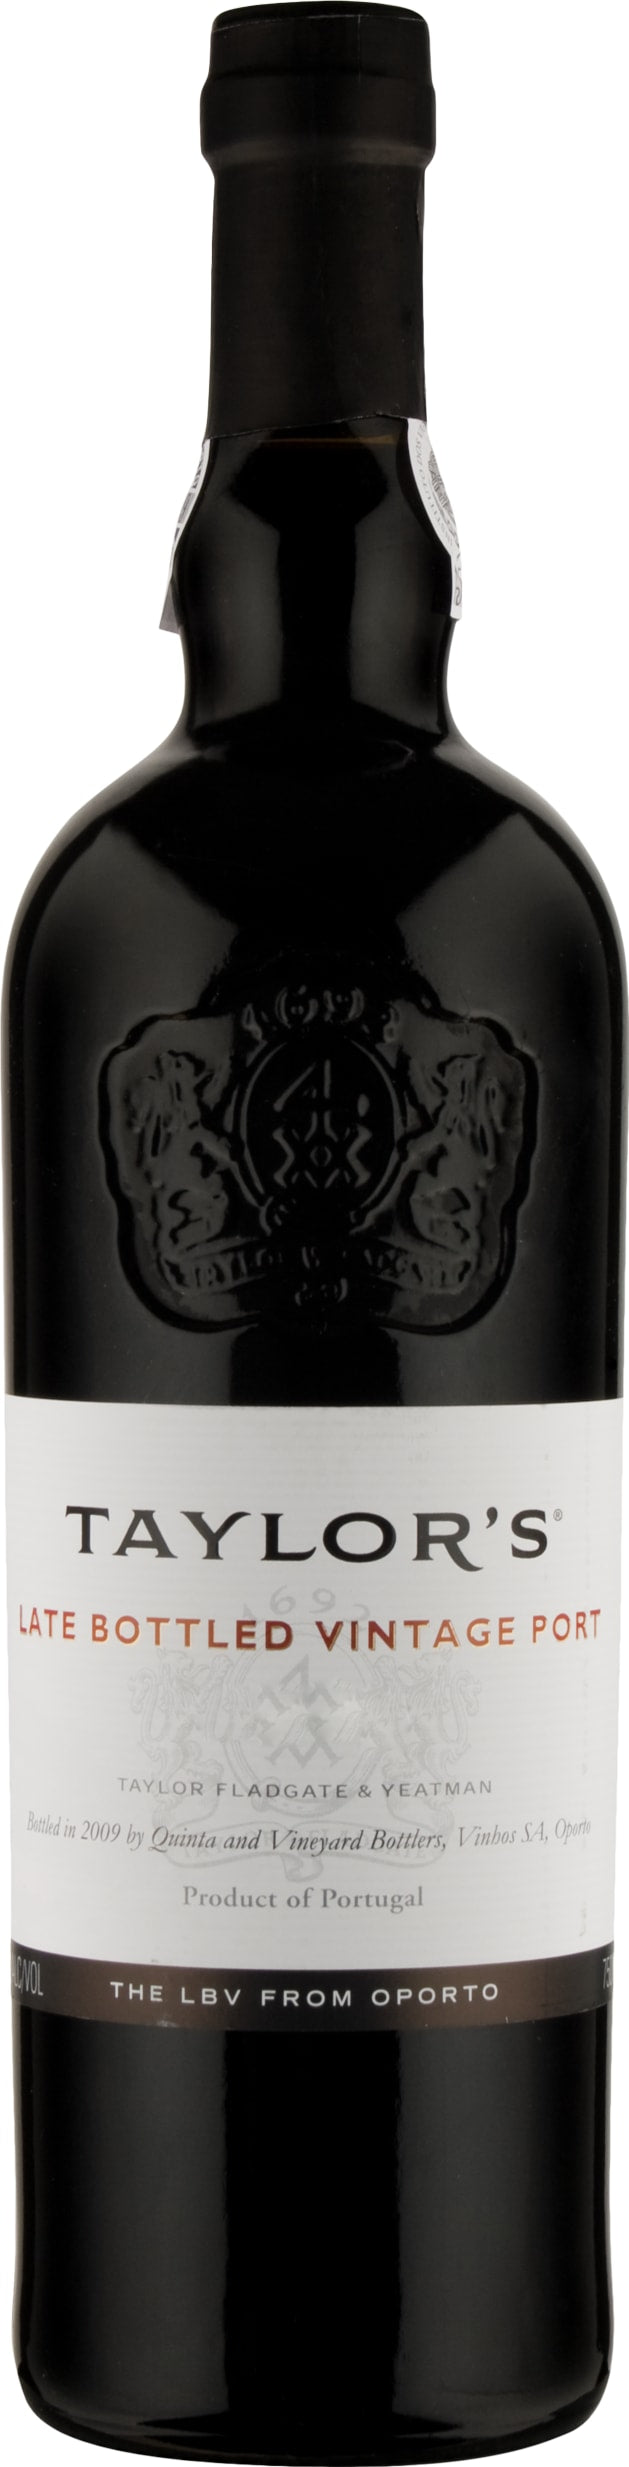 Taylor's 2018 Taylor's Late Bottled Vintage 2018 75cl - Buy Taylor's Wines from GREAT WINES DIRECT wine shop